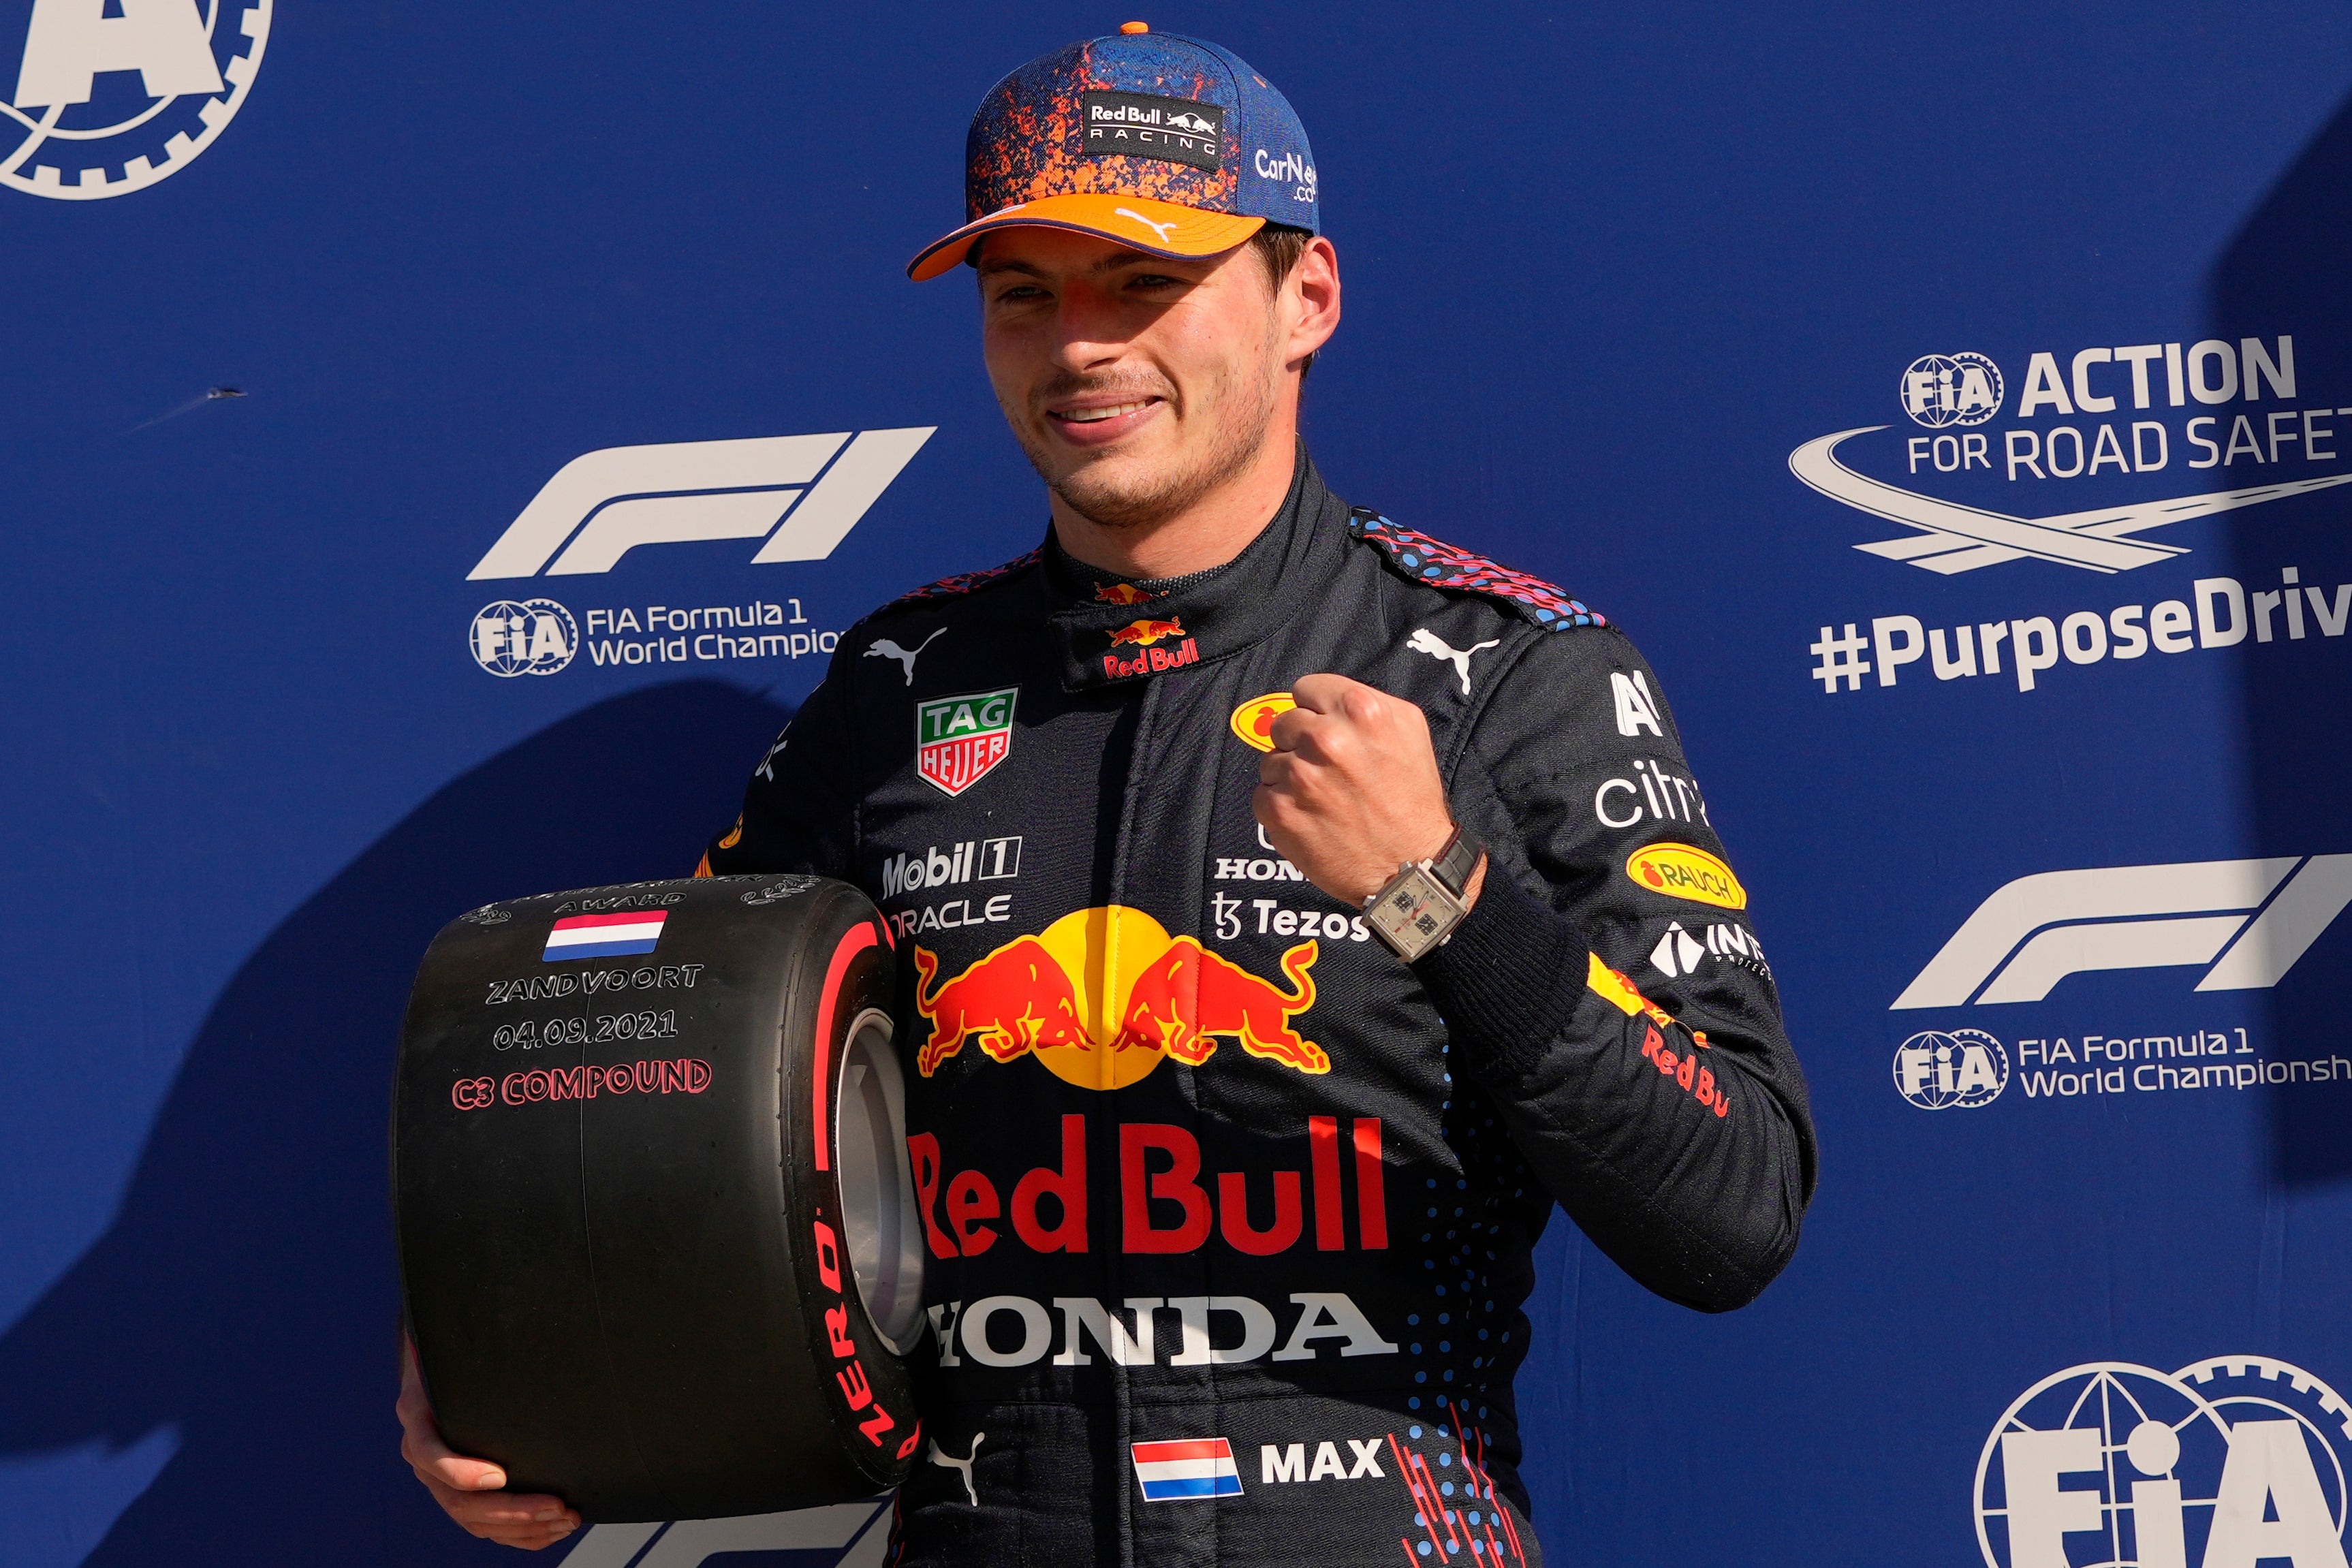 Jackie Stewart believes Max Verstappen to now be Formula One’s fastest driver